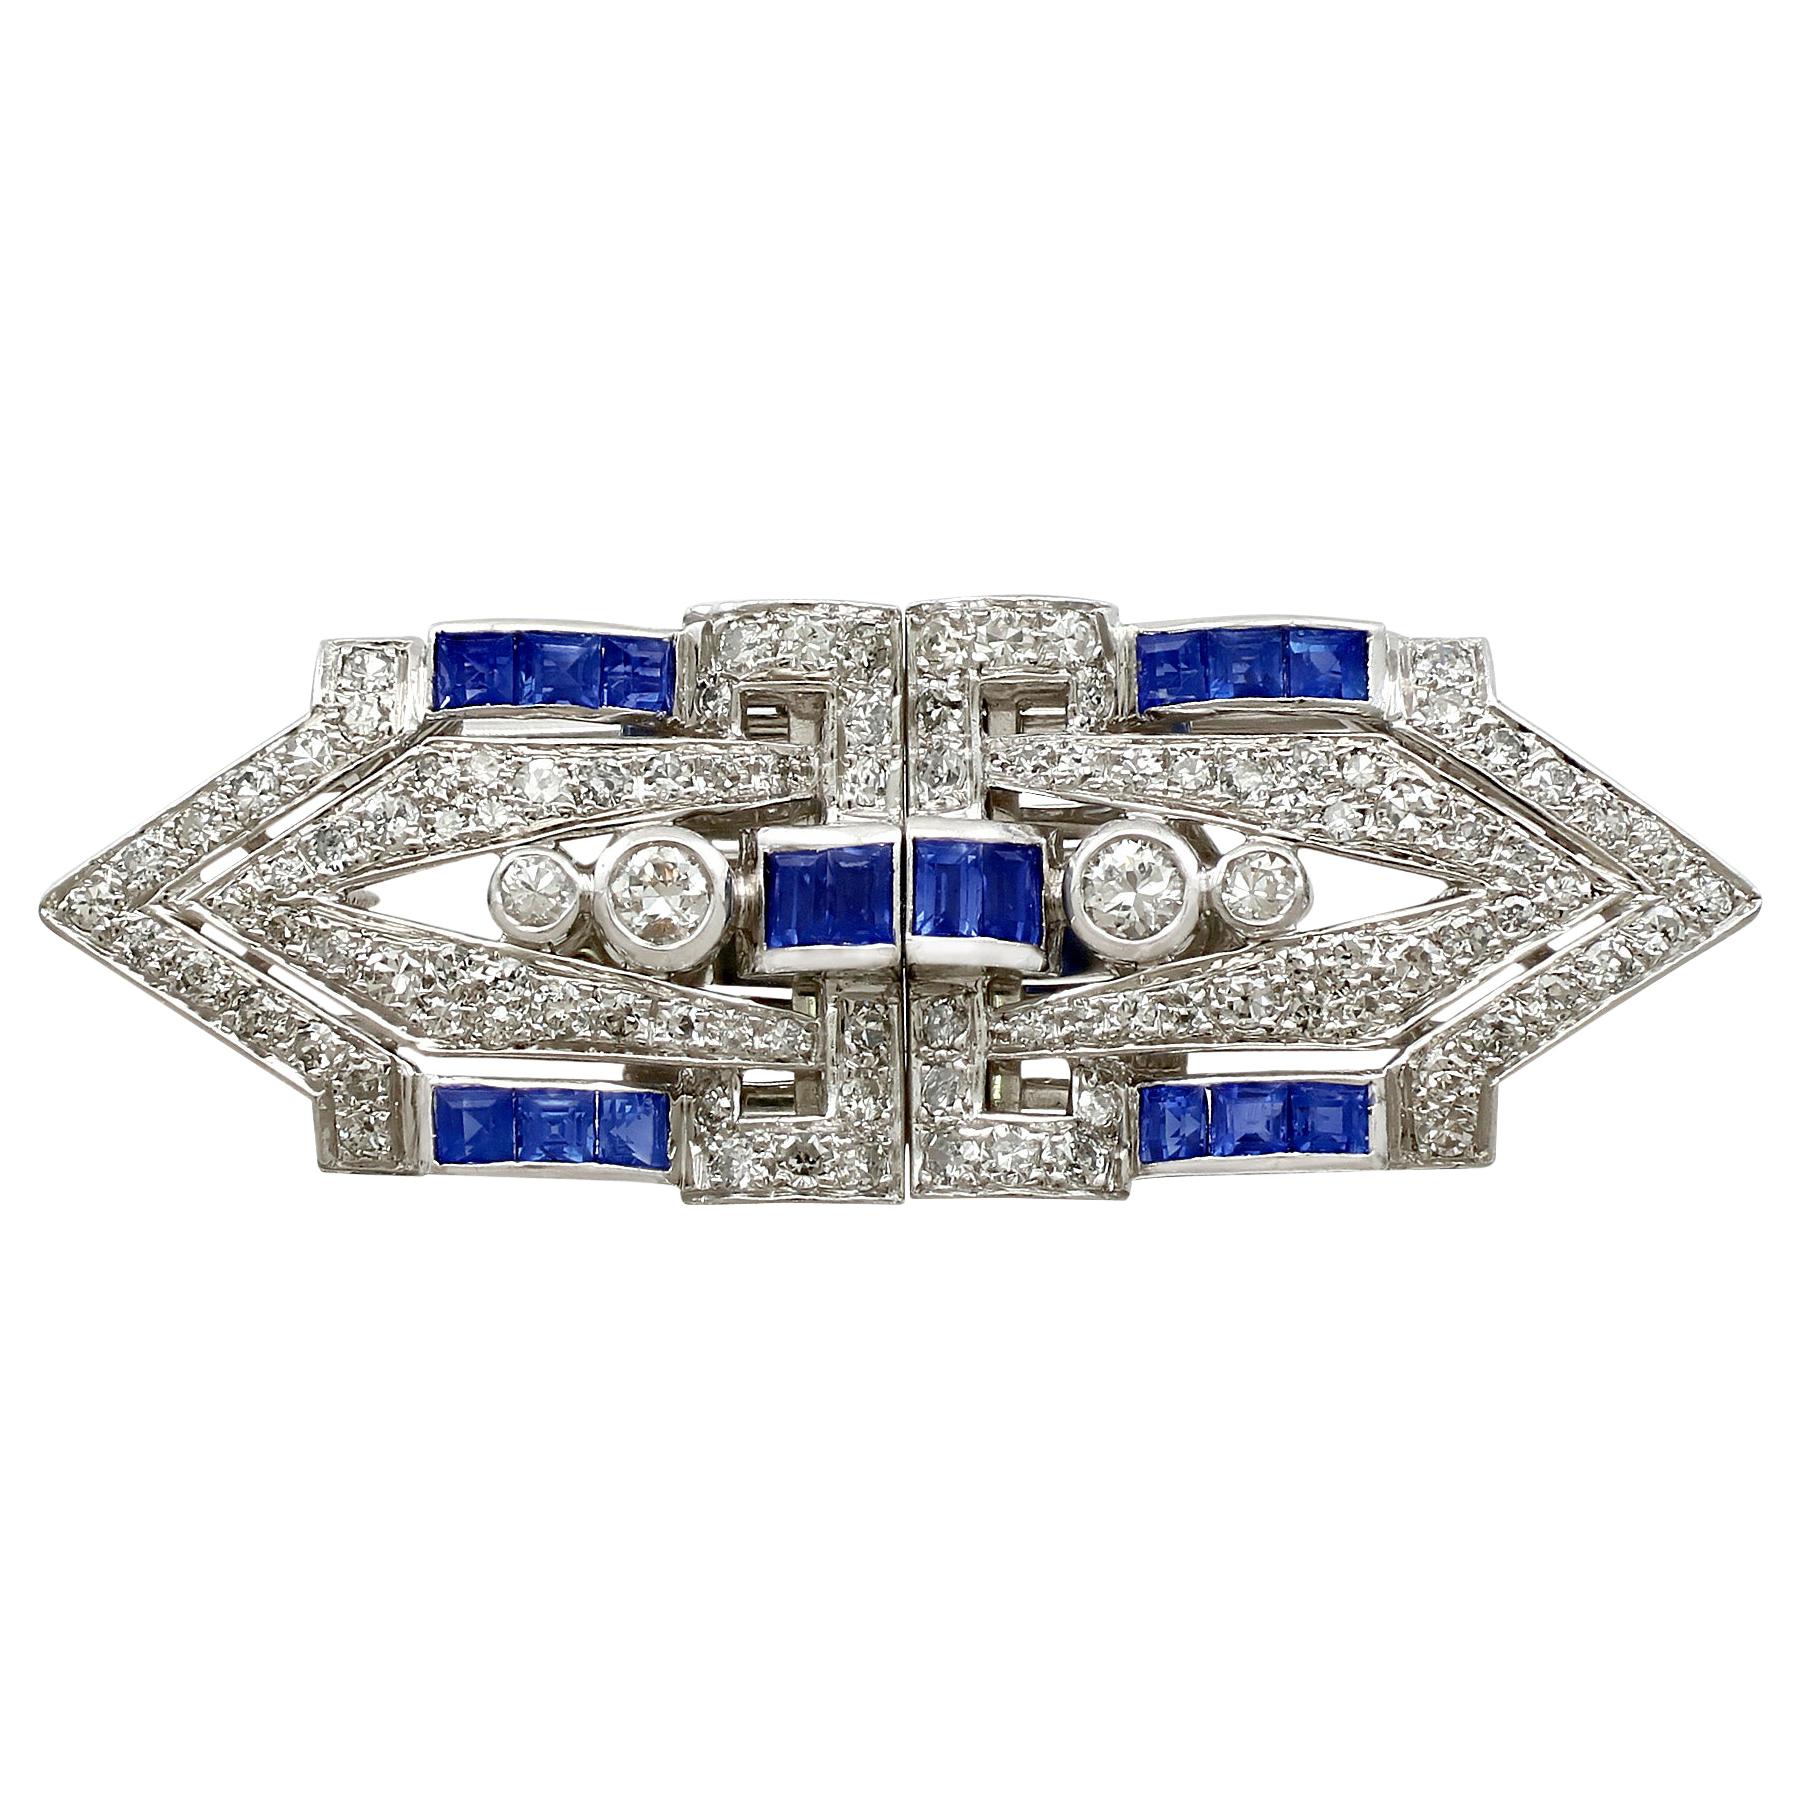 Antique 1.65 Carat Sapphire and 3.16 Carat Diamond White Gold Double Clip Brooch